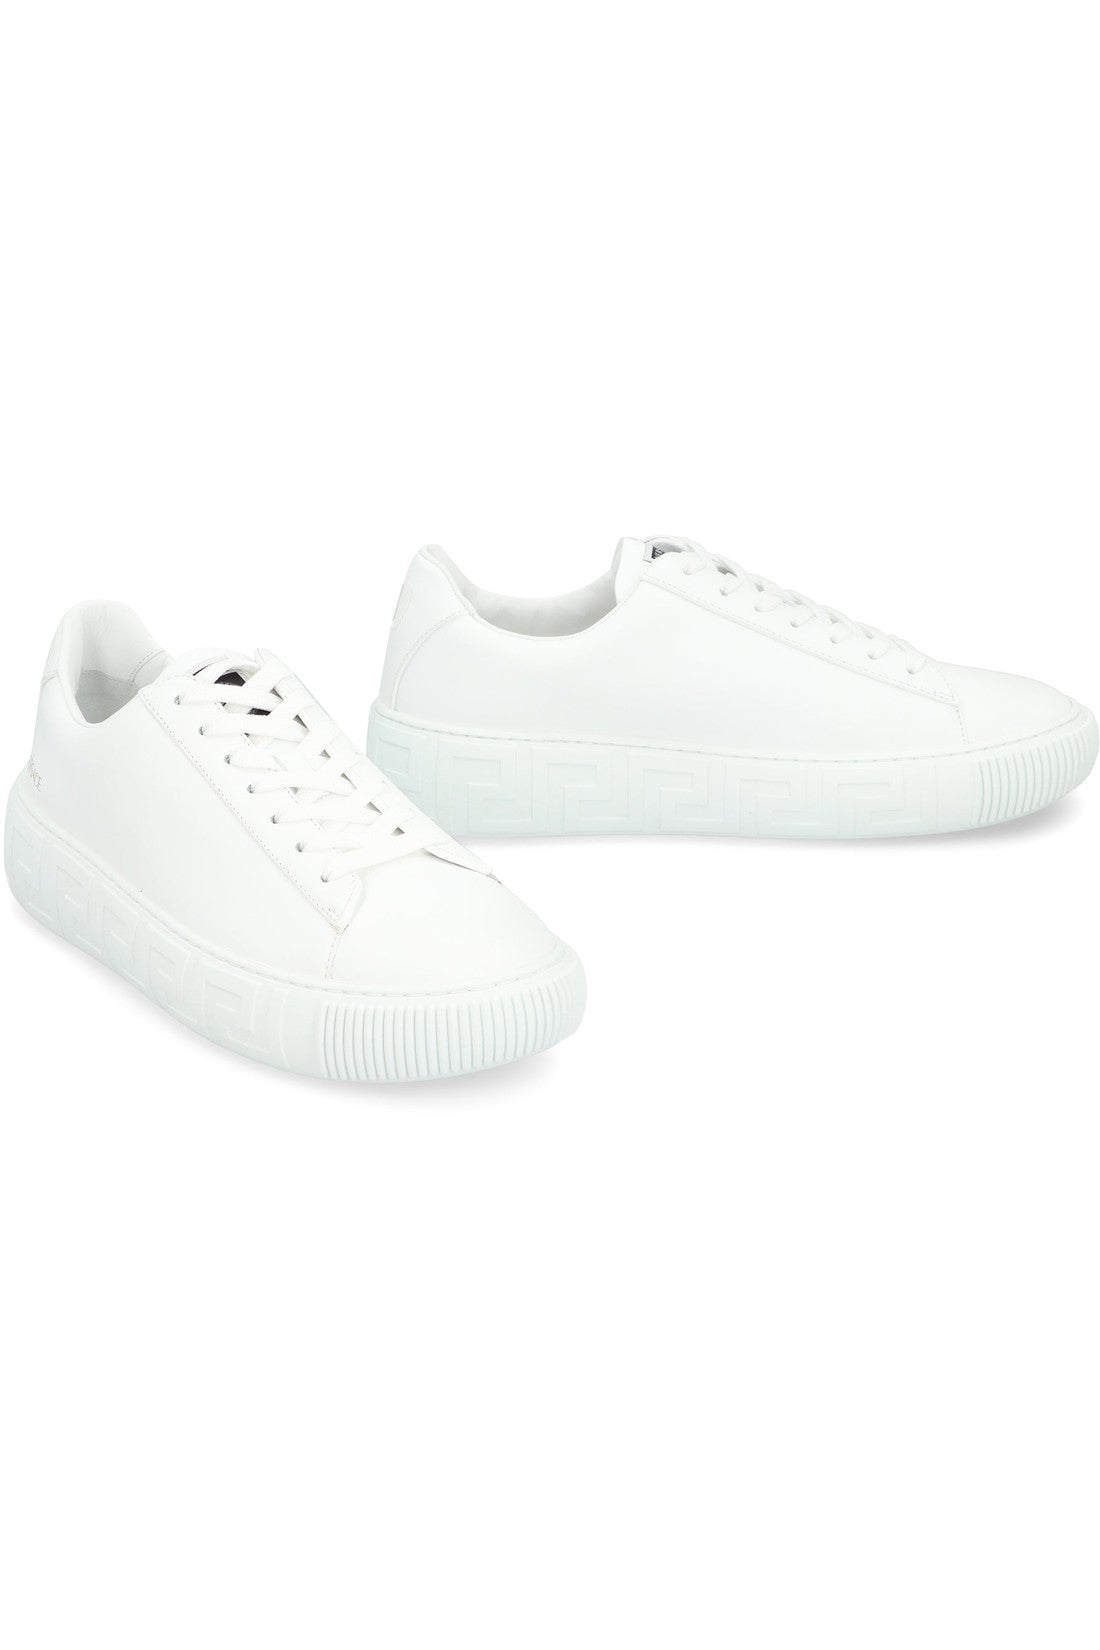 Versace-OUTLET-SALE-Greca Leather sneakers-ARCHIVIST